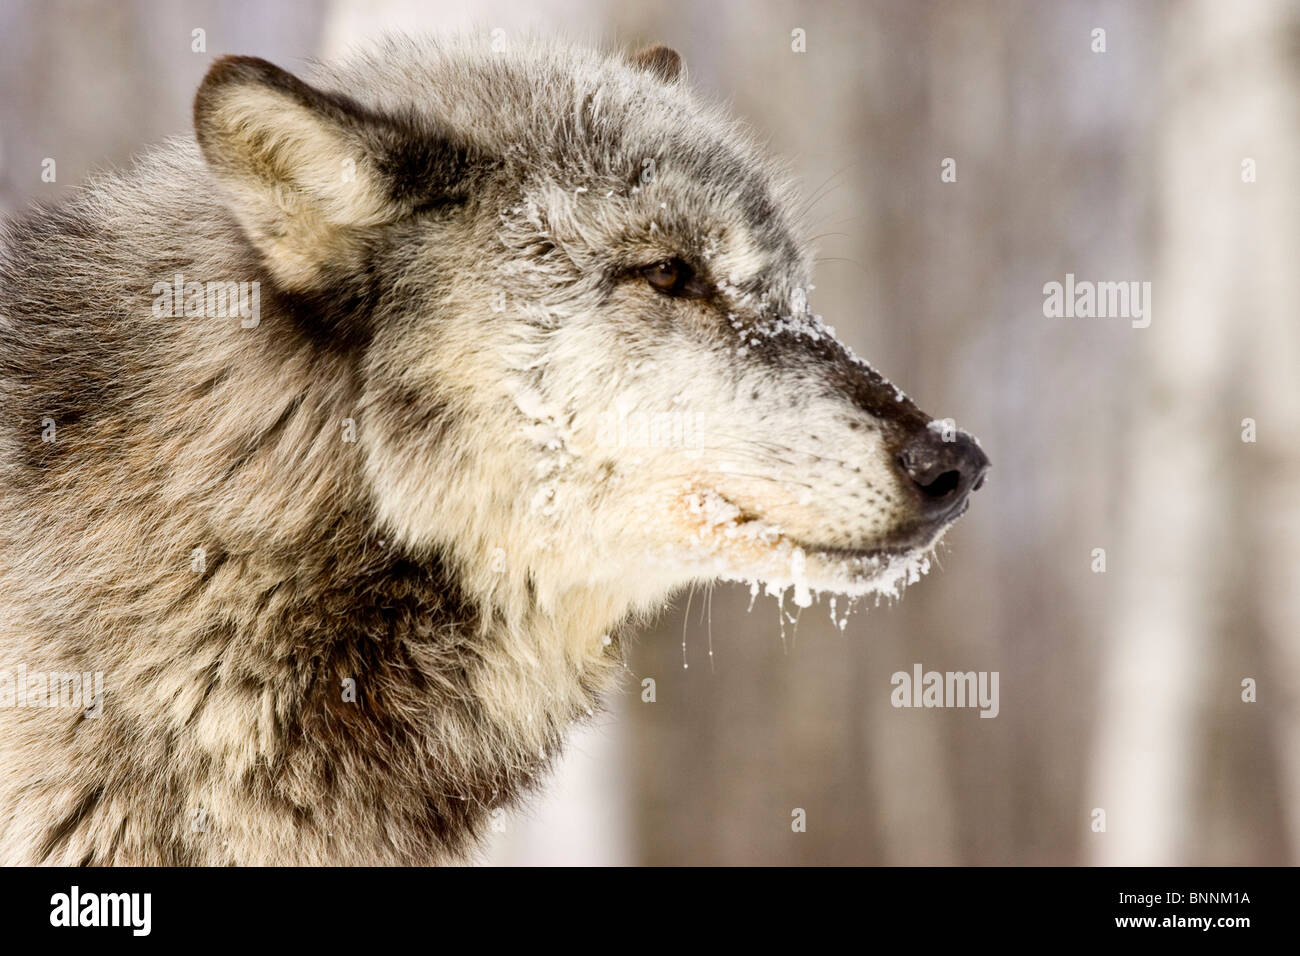 Grey Wolf Canis lupus Minnesota United States in Stock Photo